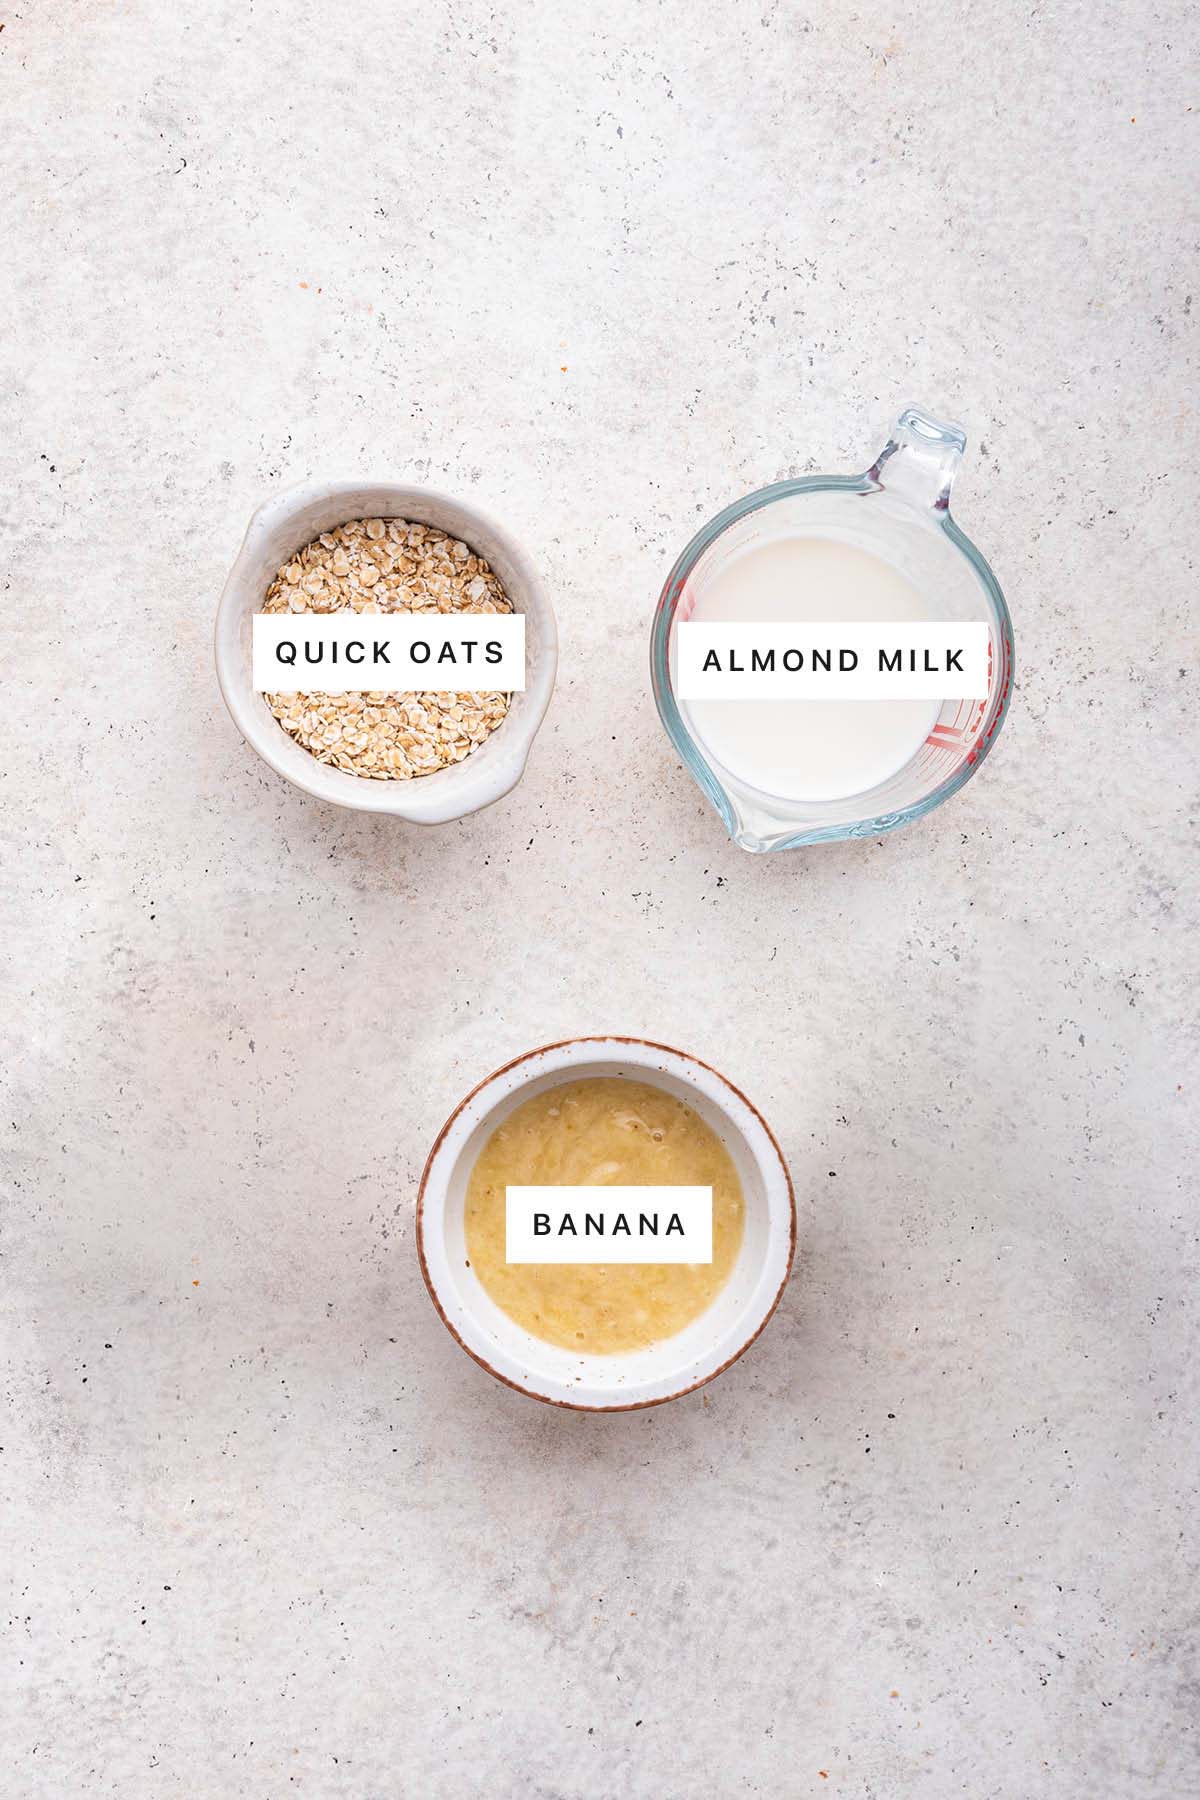 Ingredients measured out to make Oatmeal Fingers: quick oats, almond milk and banana.